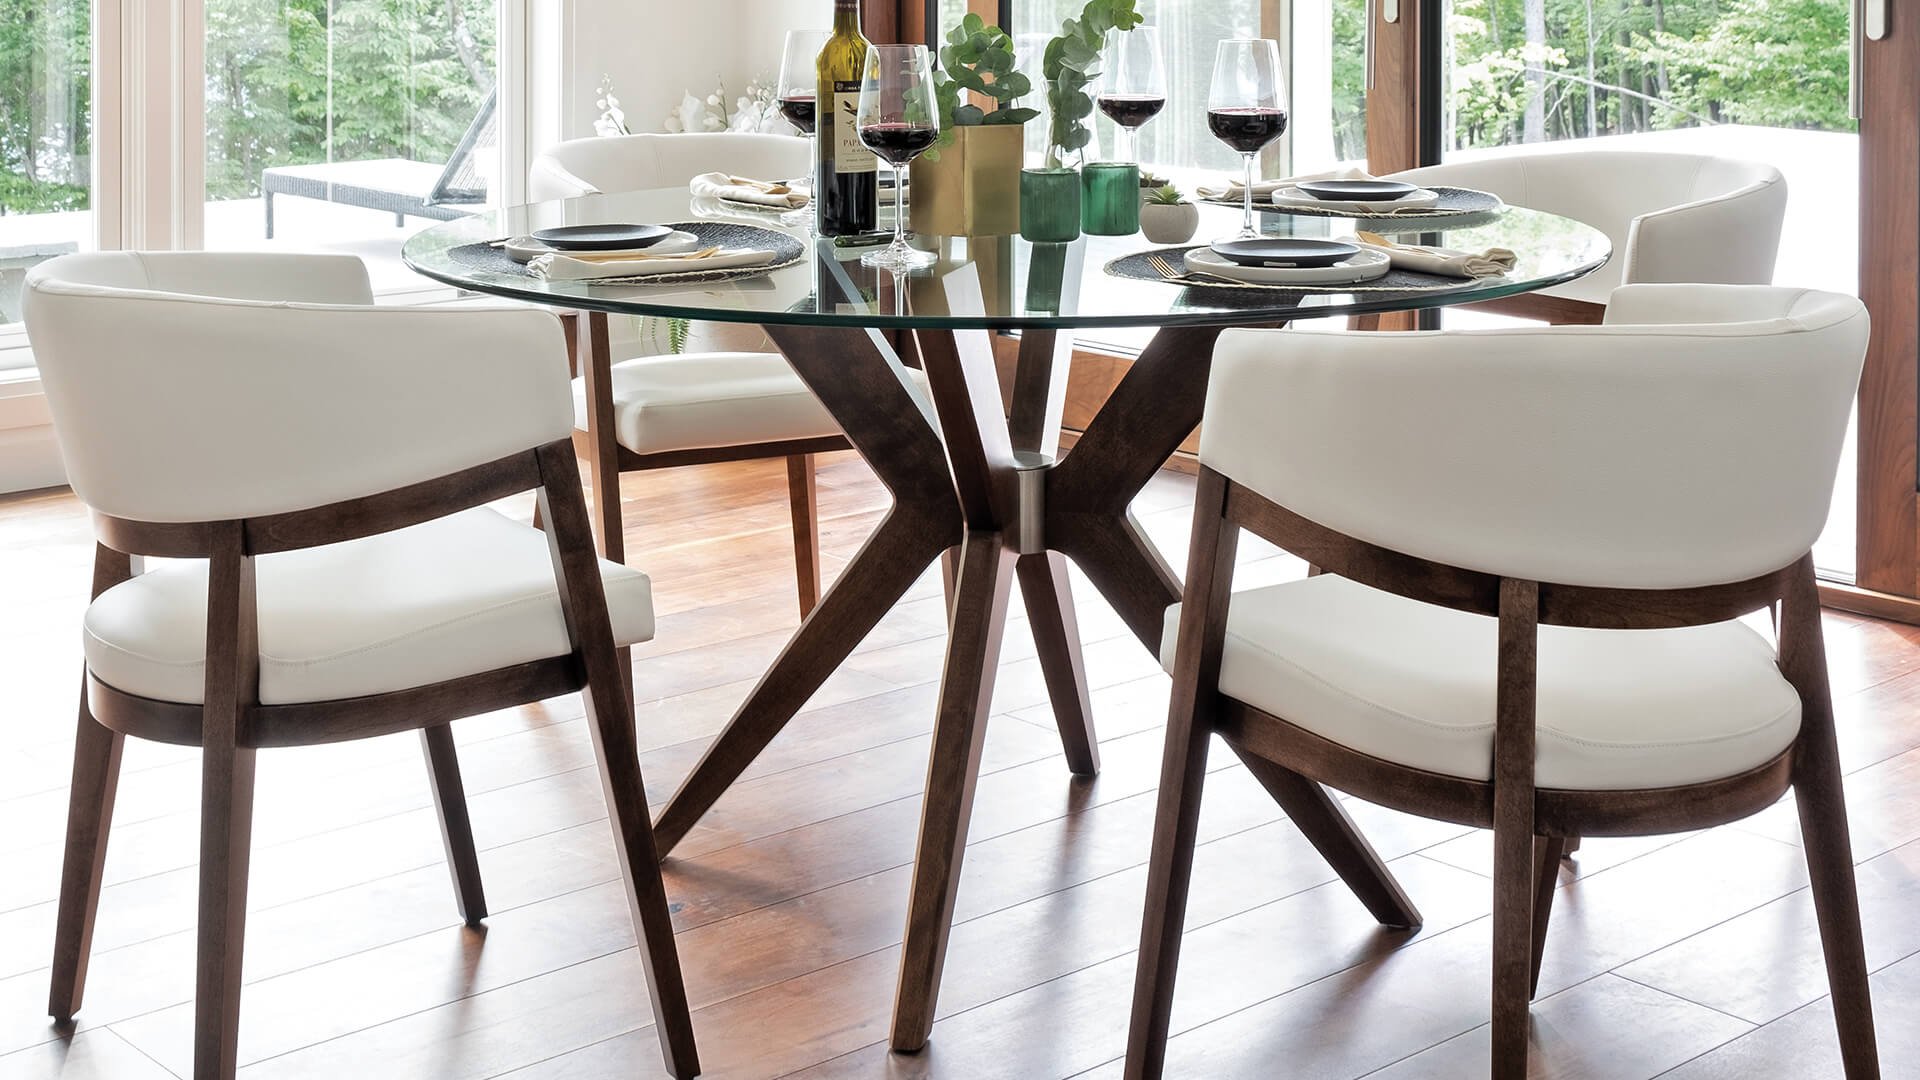 Canadel Dining Table Chairs West Palm Beach